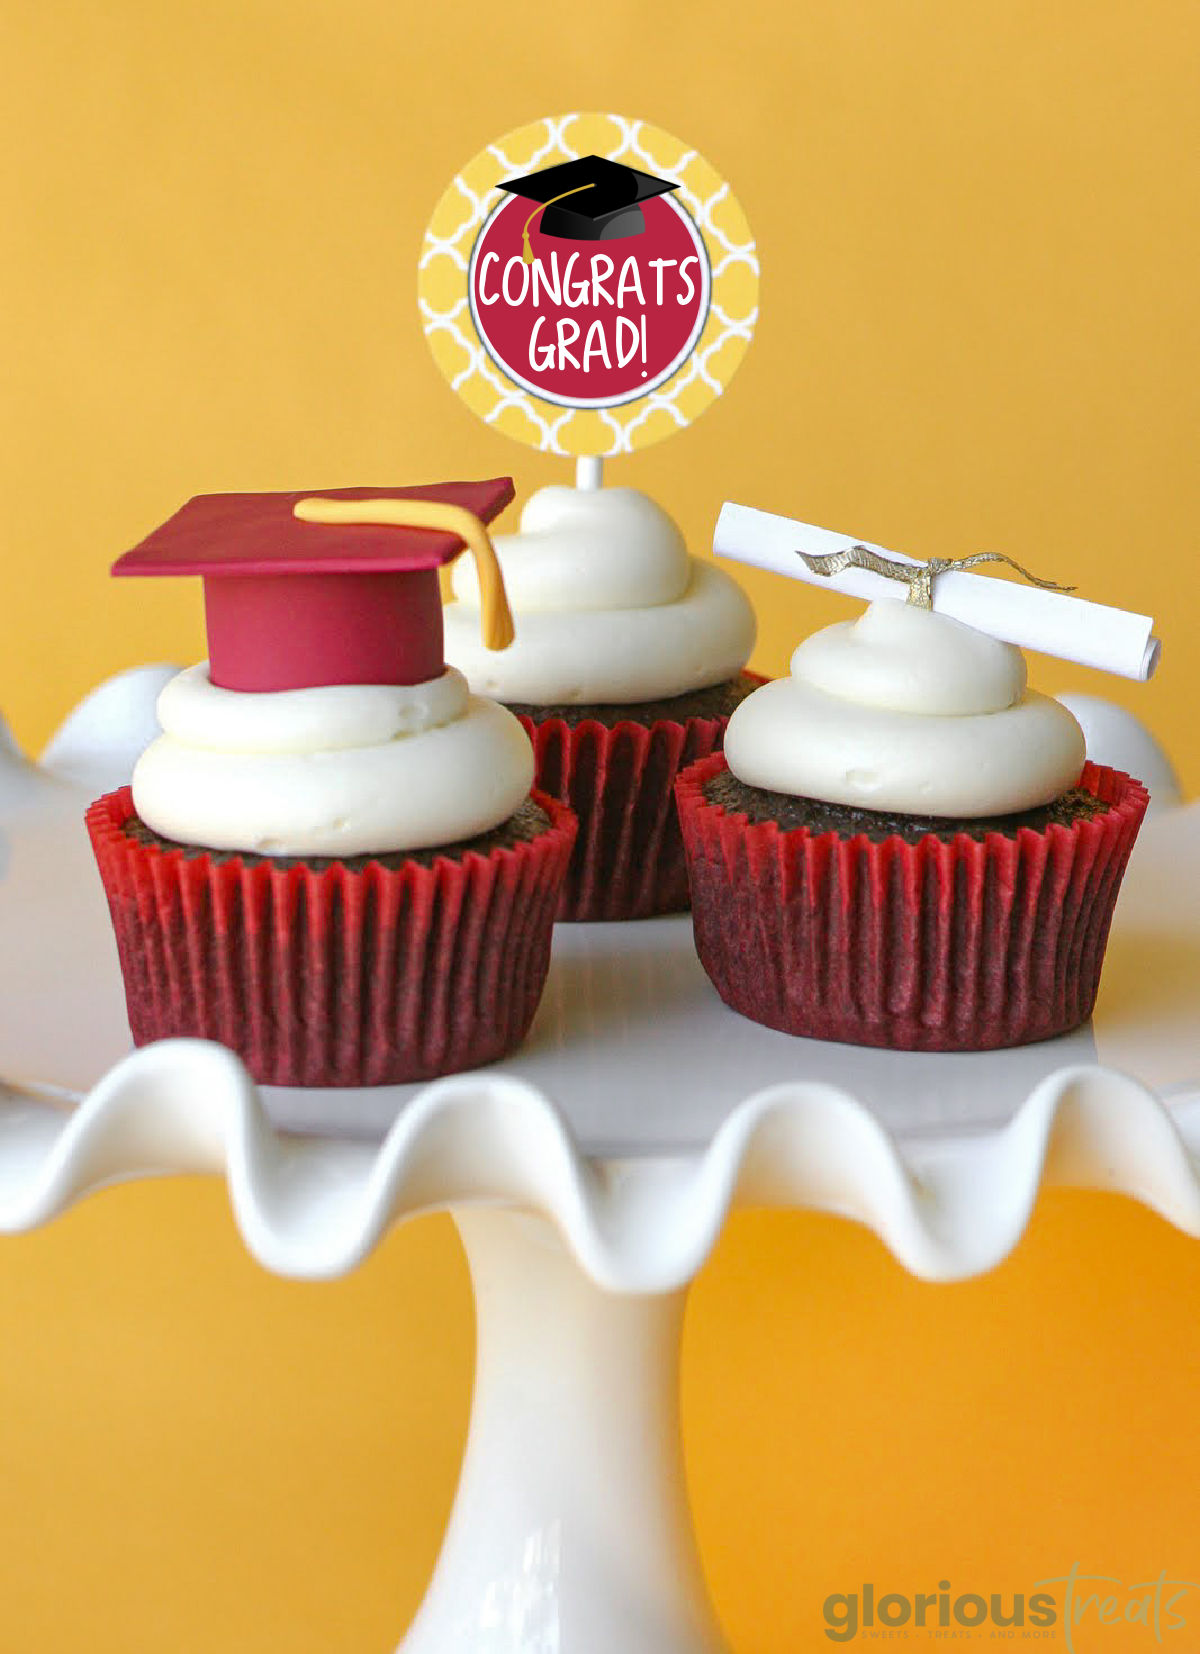 three cupcakes on a white serving platter topped with a graduation cap, a diploma, and a congrats grad decoration